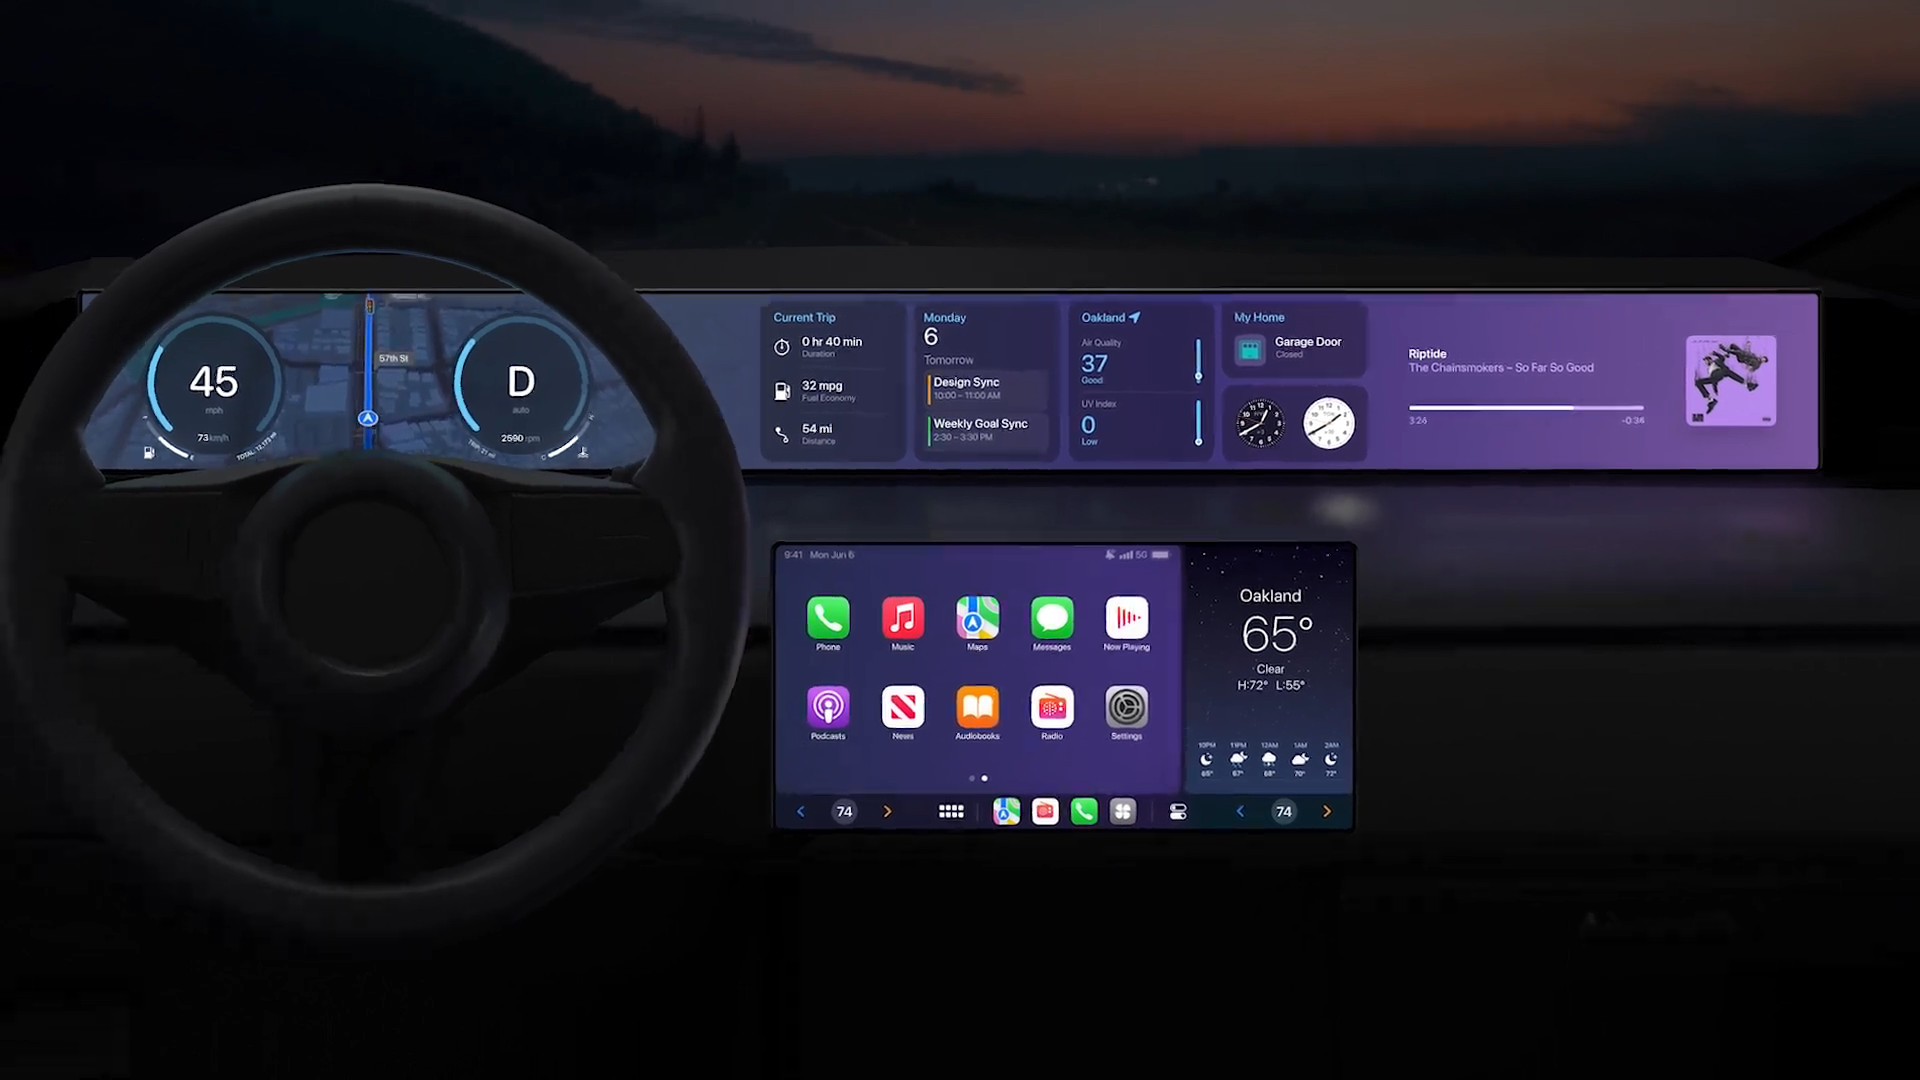 Apple has announced upcoming updates to CarPlay that set the foundation for their longterm strategy to take over the inside of your car.